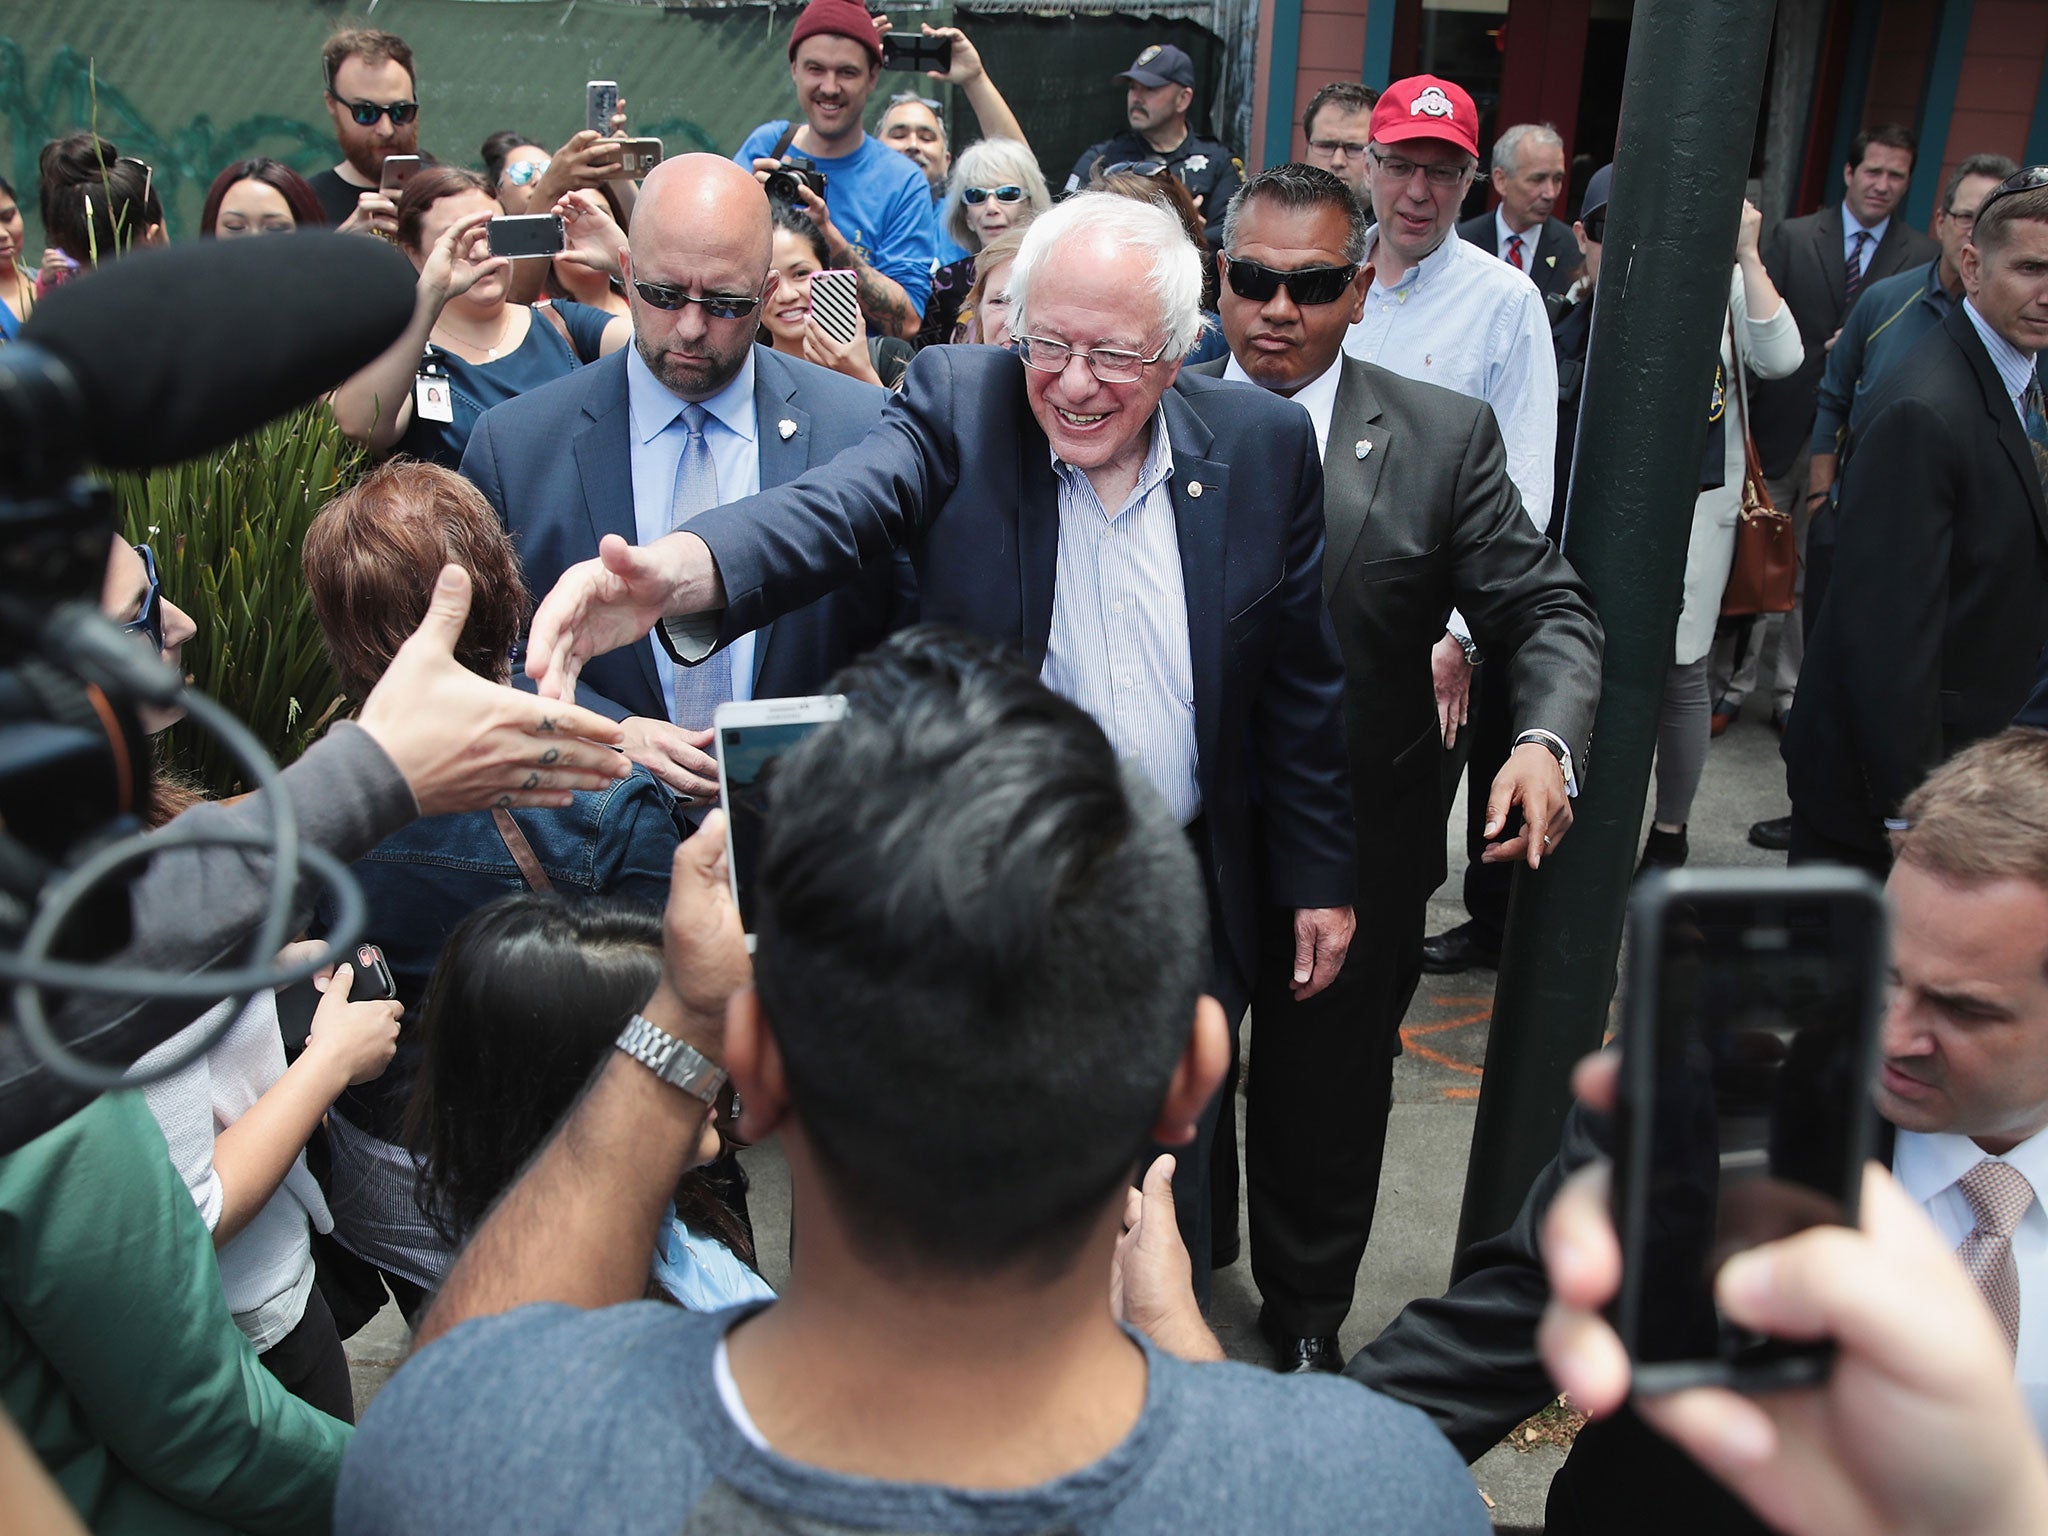 Sanders greets people outside Aunt Mary's Cafe in Oakland